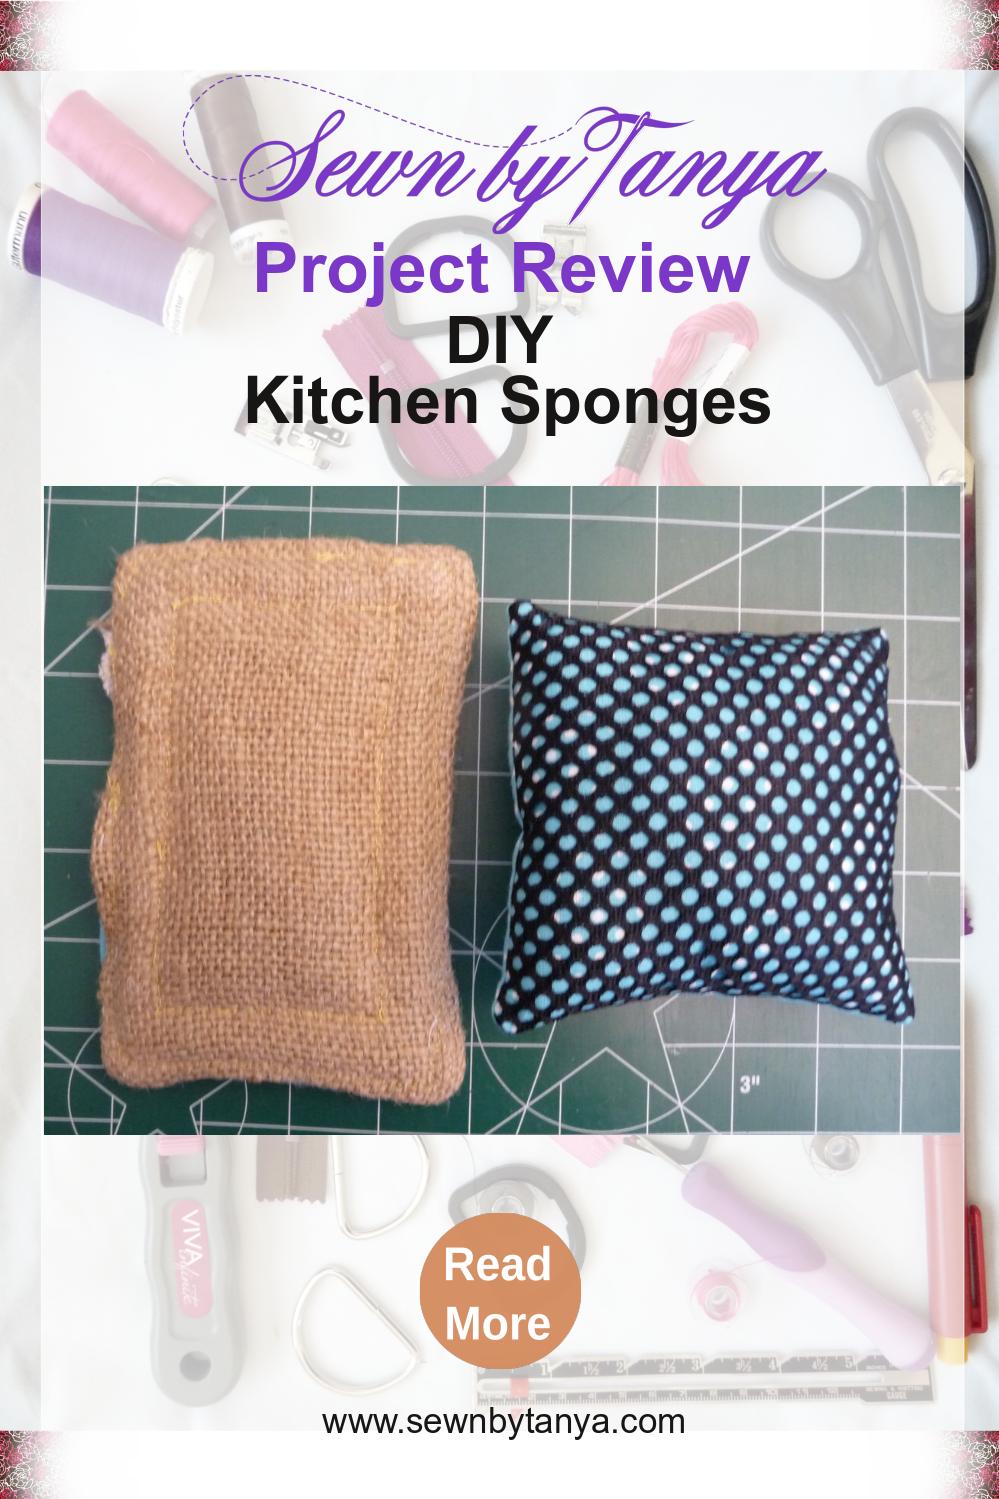 Sewn By Tanya Project Review DIY Kitchen Sponges